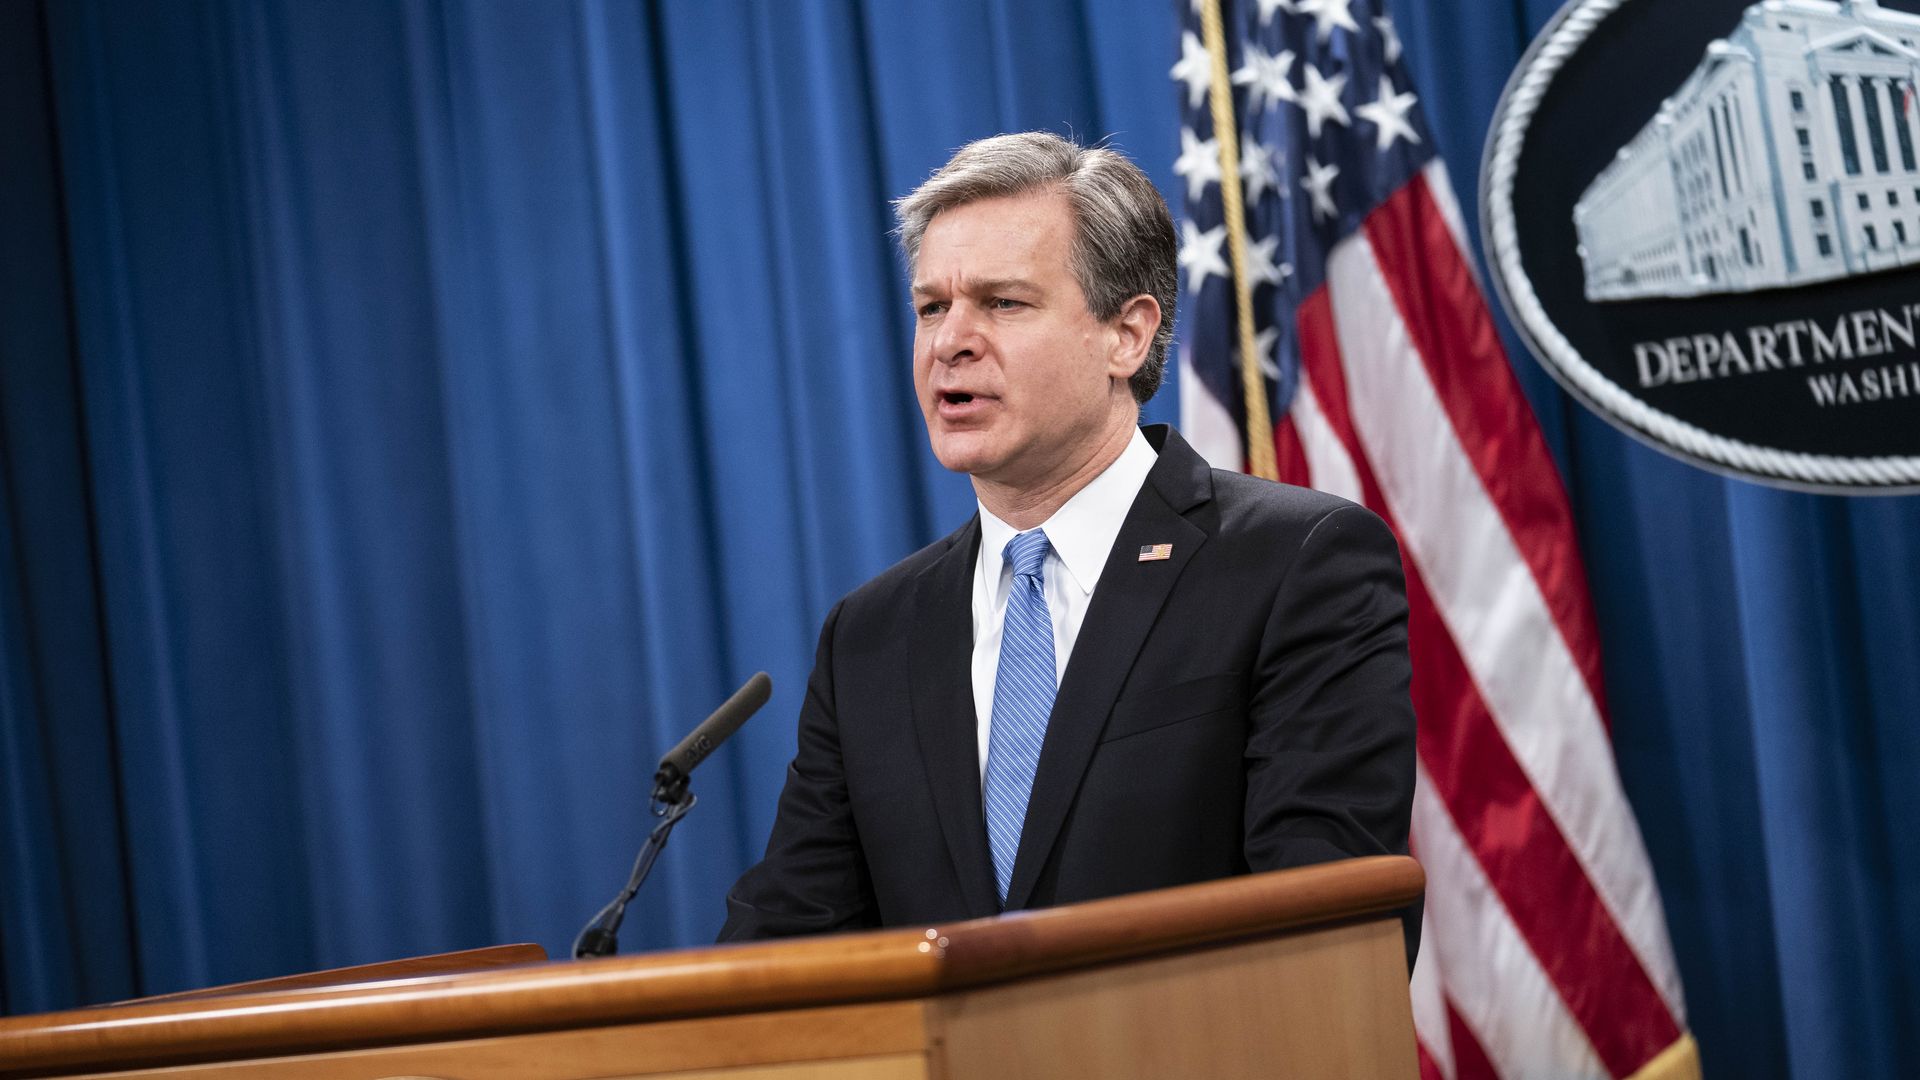 FBI Director Christopher Wray speaks during a virtual news conference at the Department of Justice on October 28, 2020 in Washington, DC.